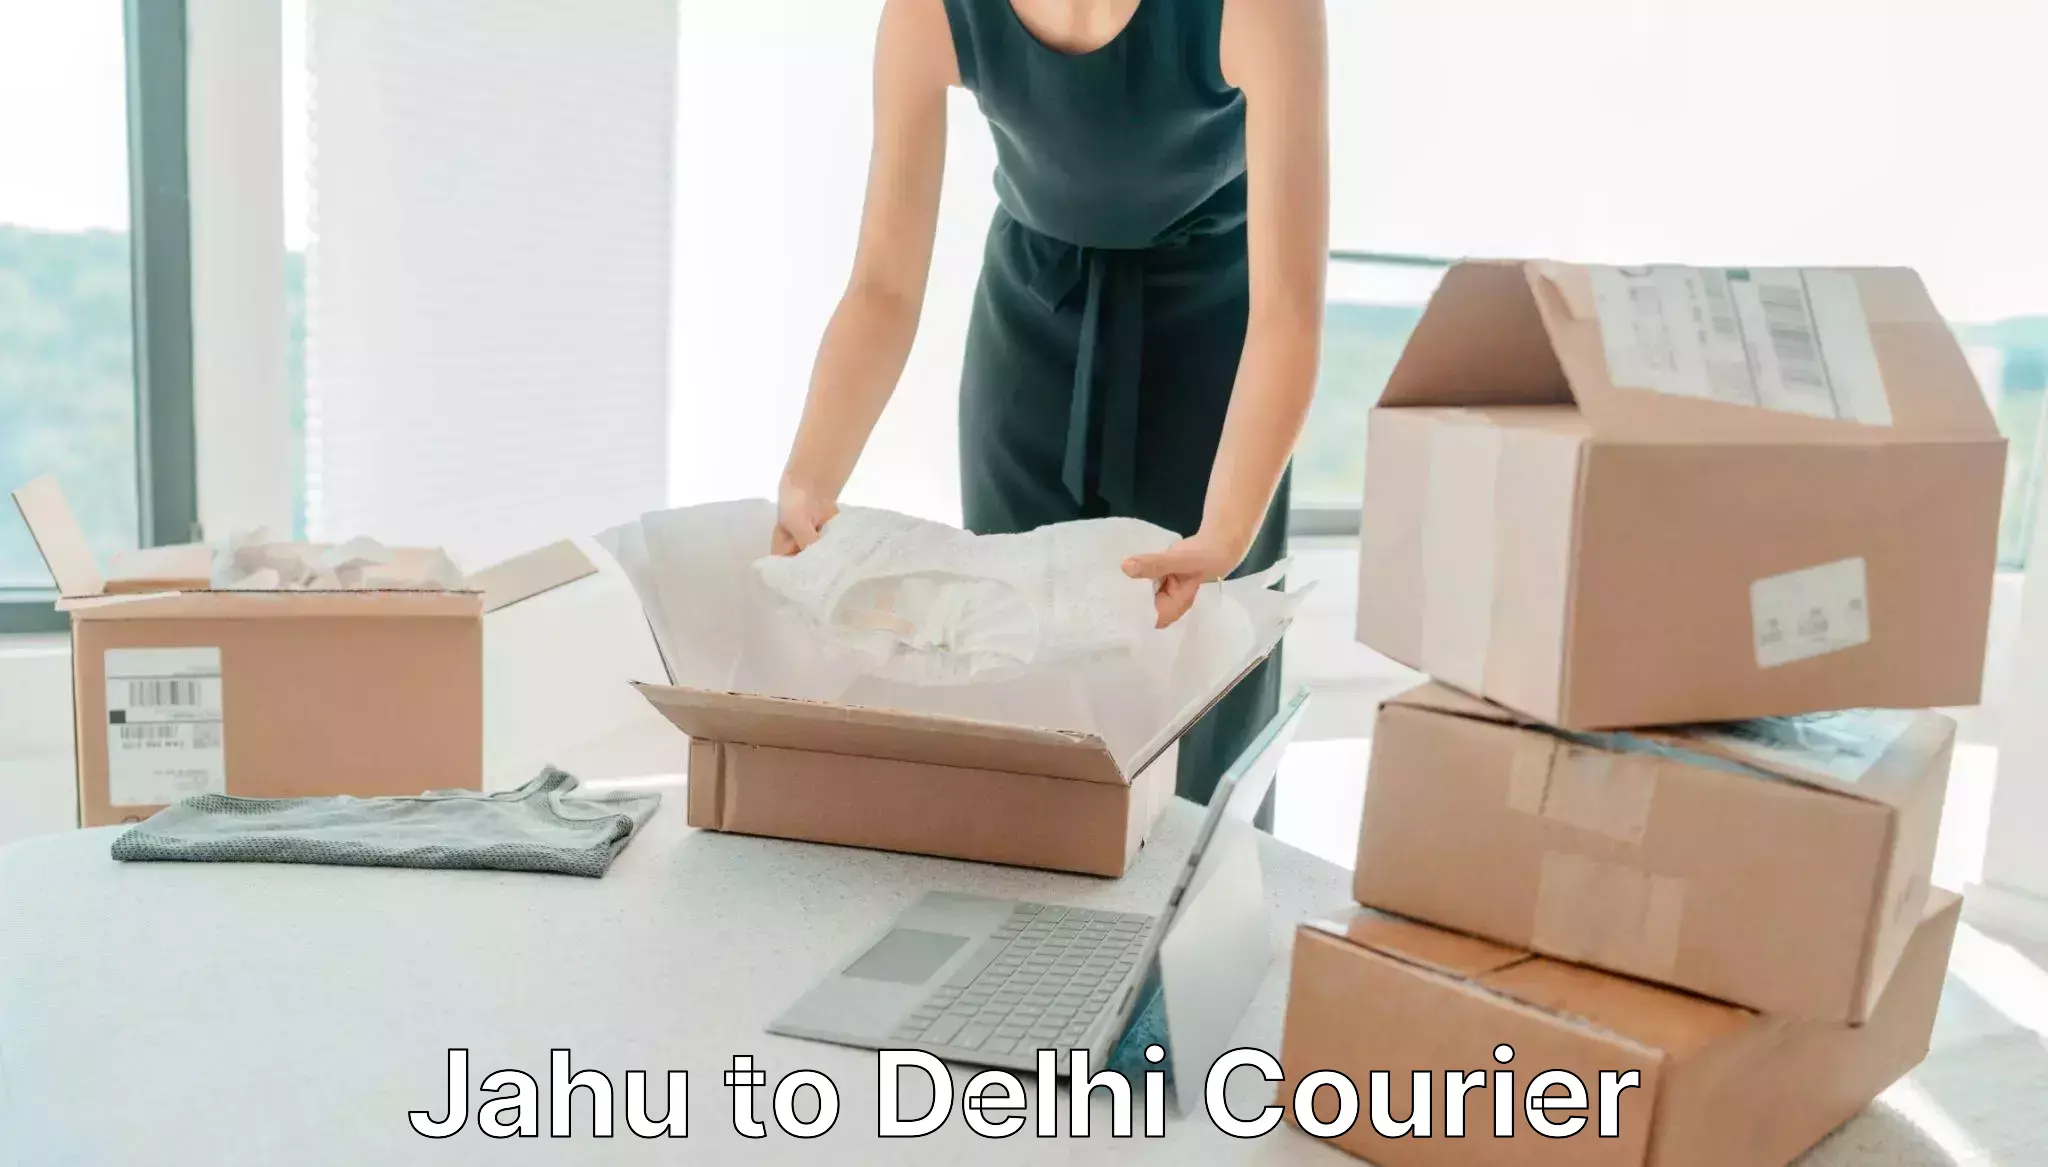 Same-day delivery solutions Jahu to University of Delhi